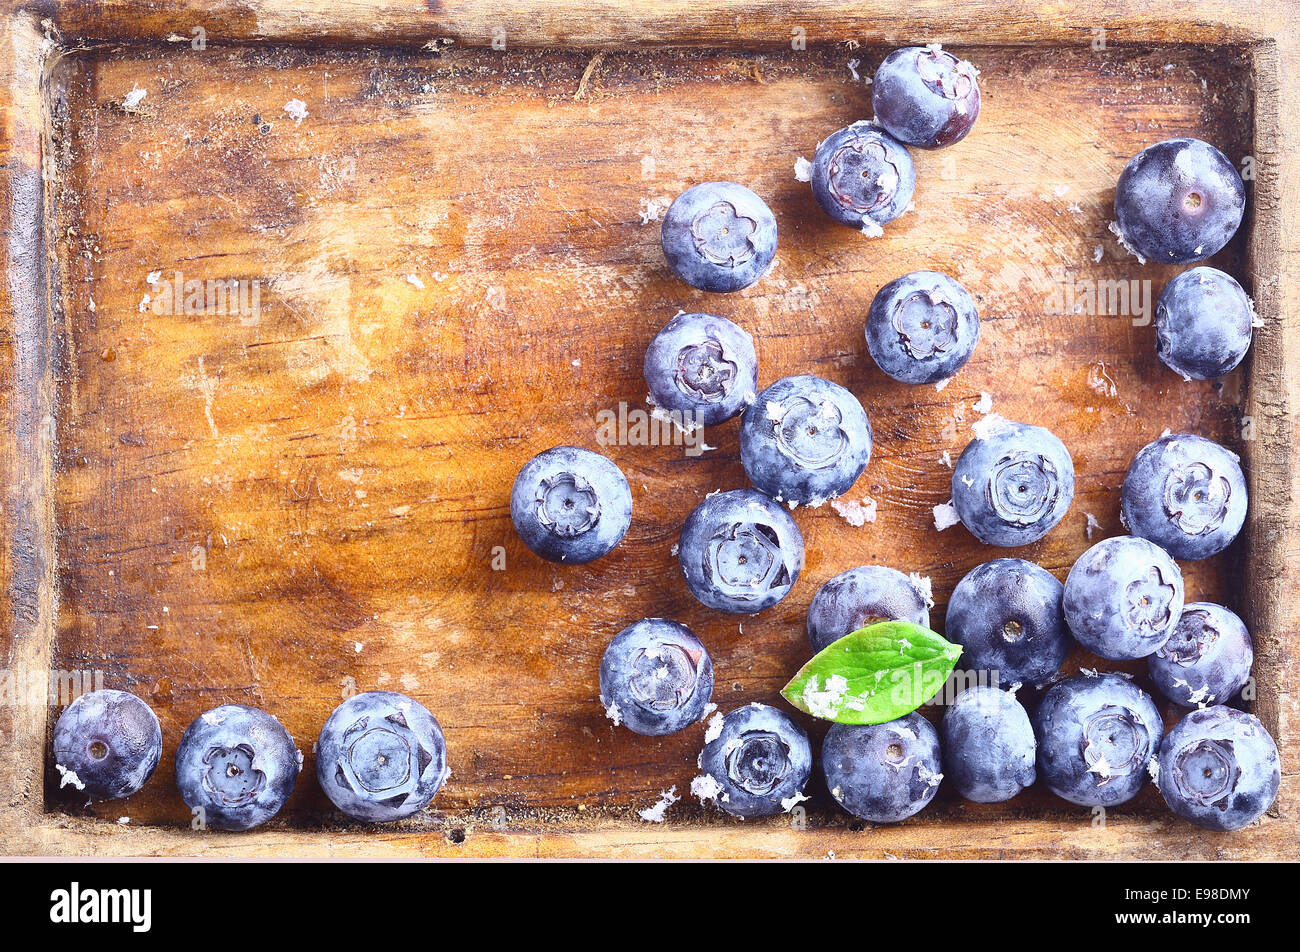 Close-up of a small amount of ripe blueberries or bilberries in an old wooden tray with a green leaf Stock Photo